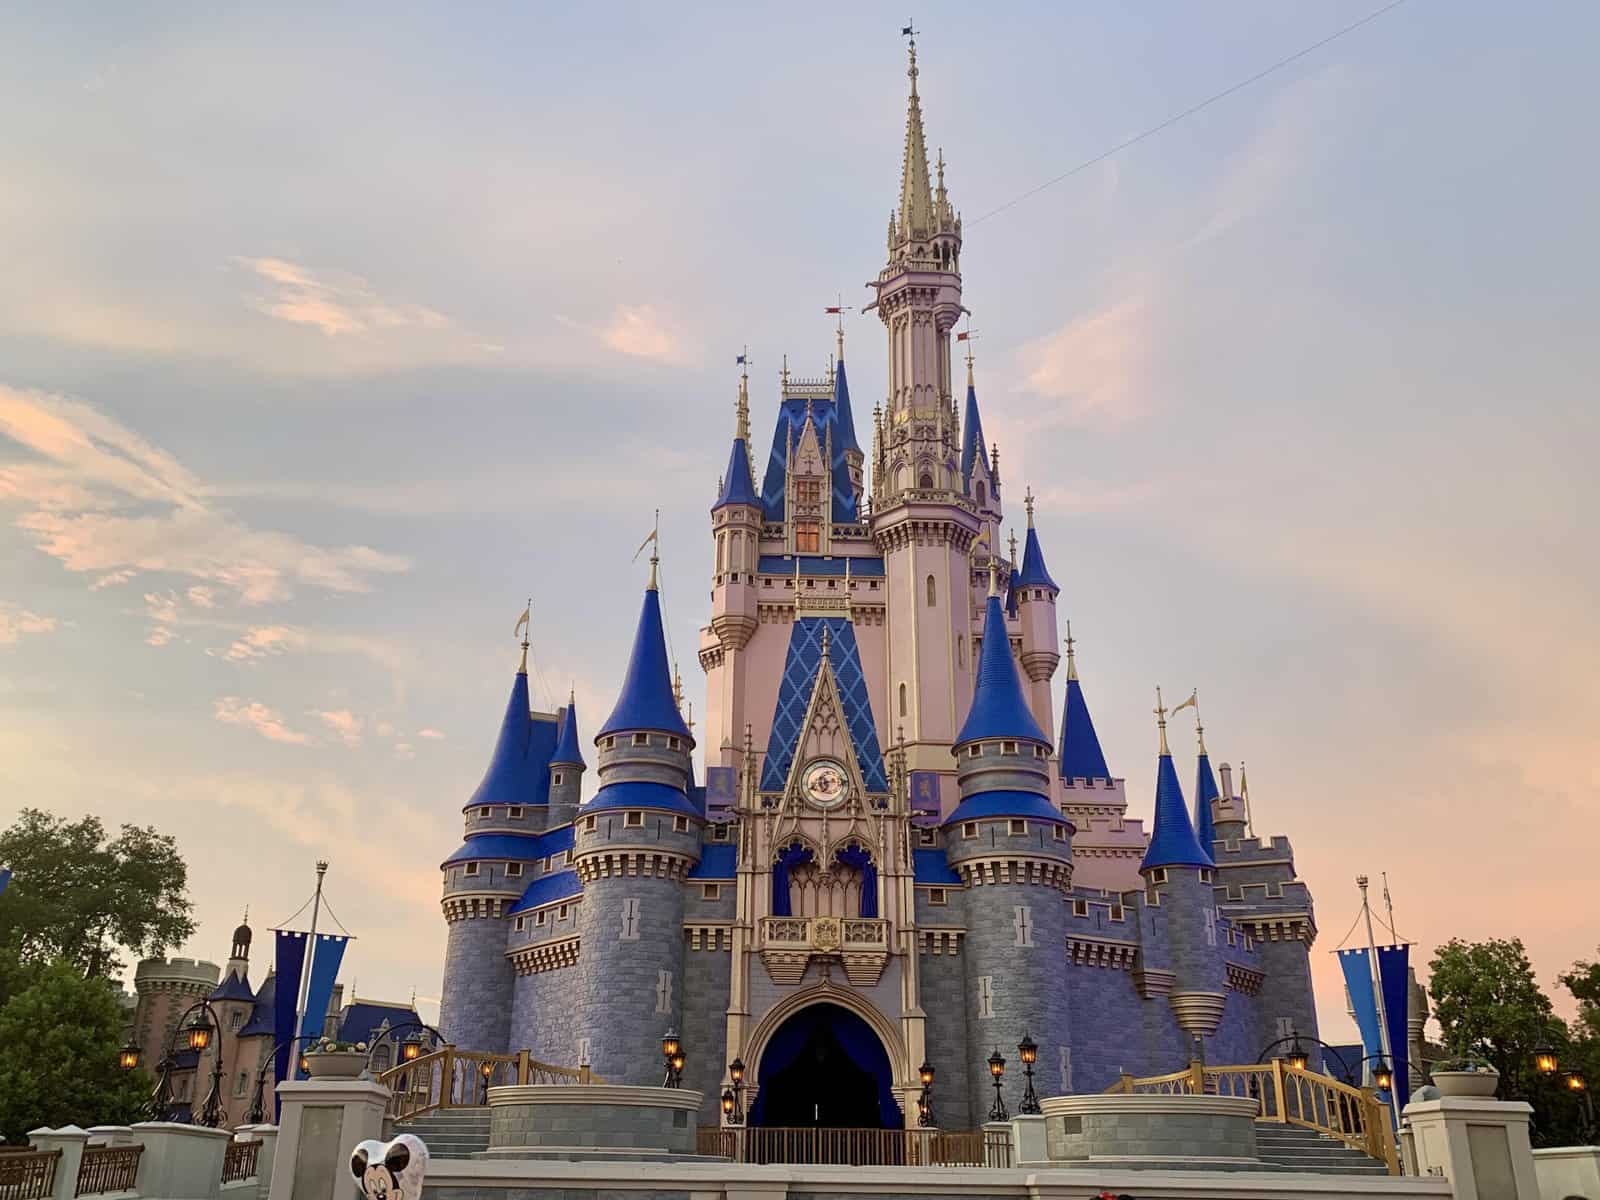 How much does a trip to Walt Disney World cost?